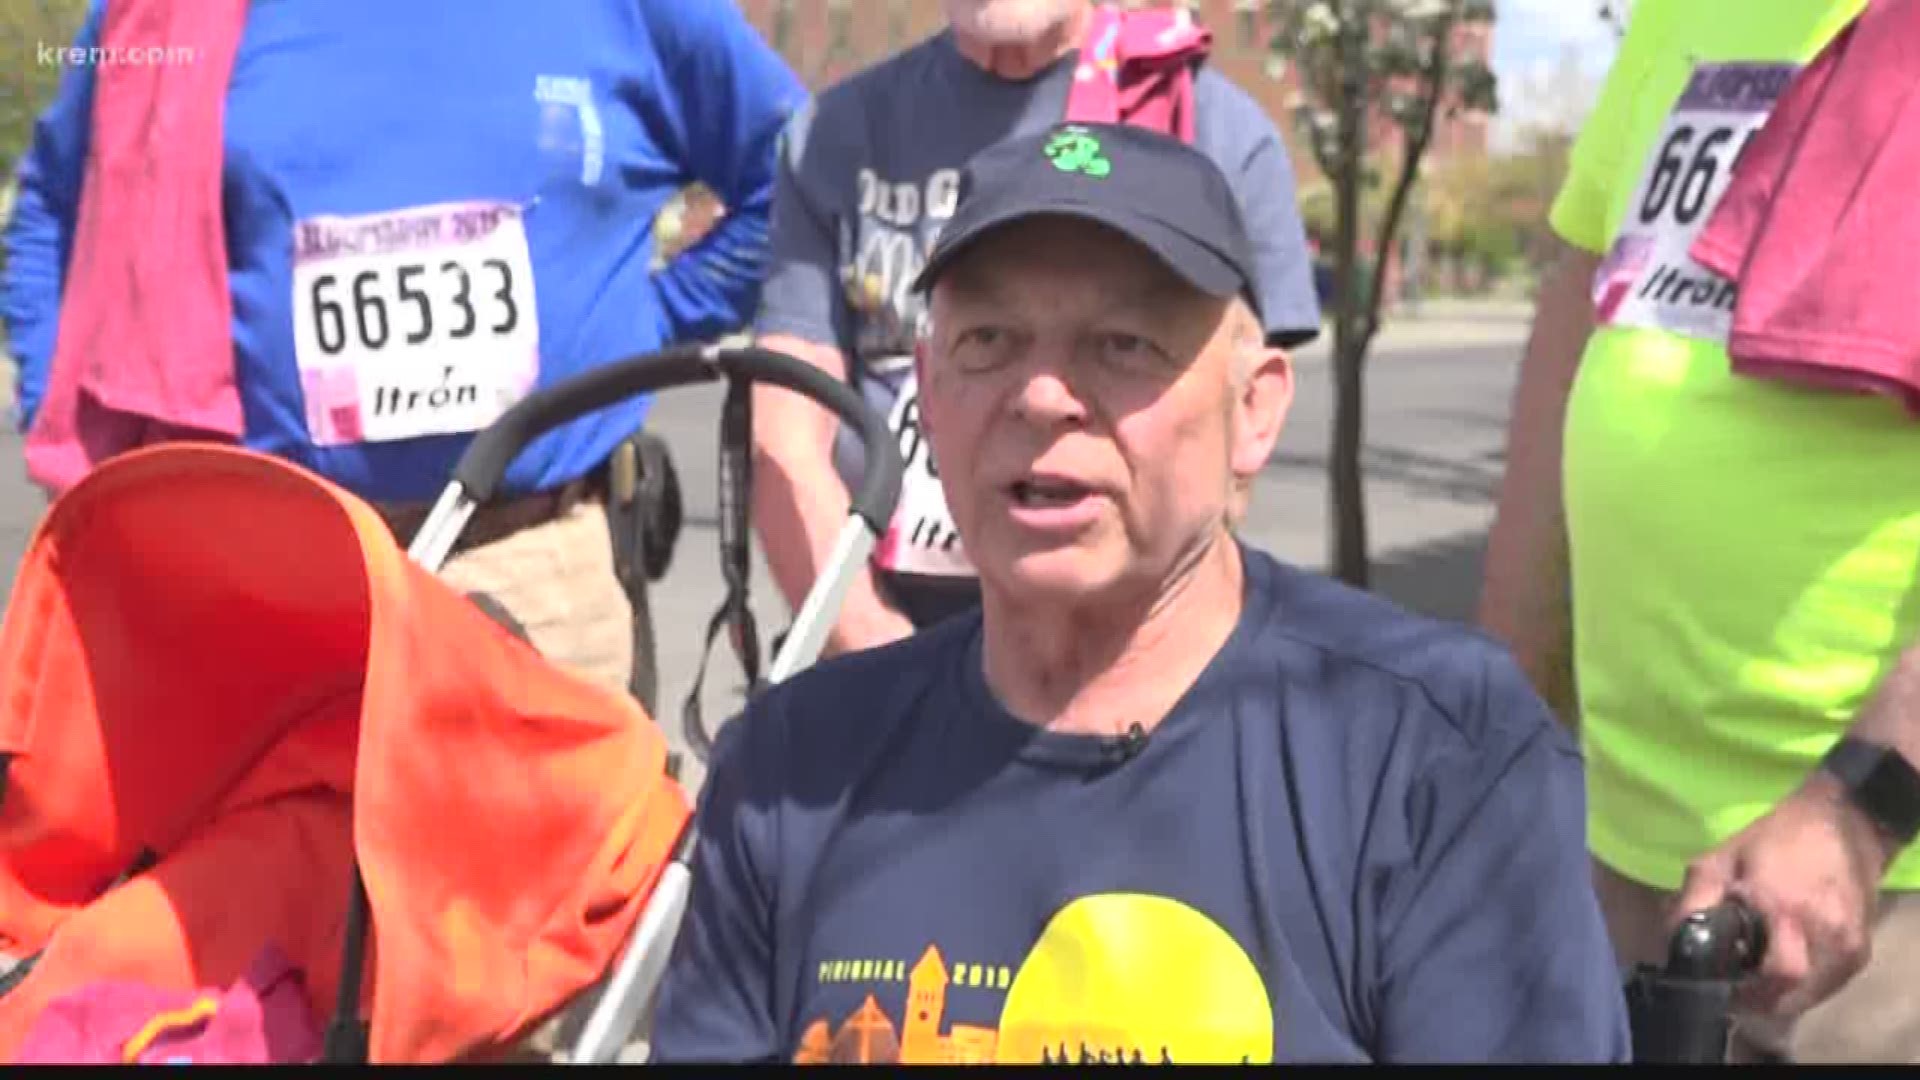 KREM Reporter Kierra Elfalan met up with Pete Thompson, who had the support of about a dozen family members to push him through the course to keep his status as a 'perennial,' or someone who has completely every Bloomsday.